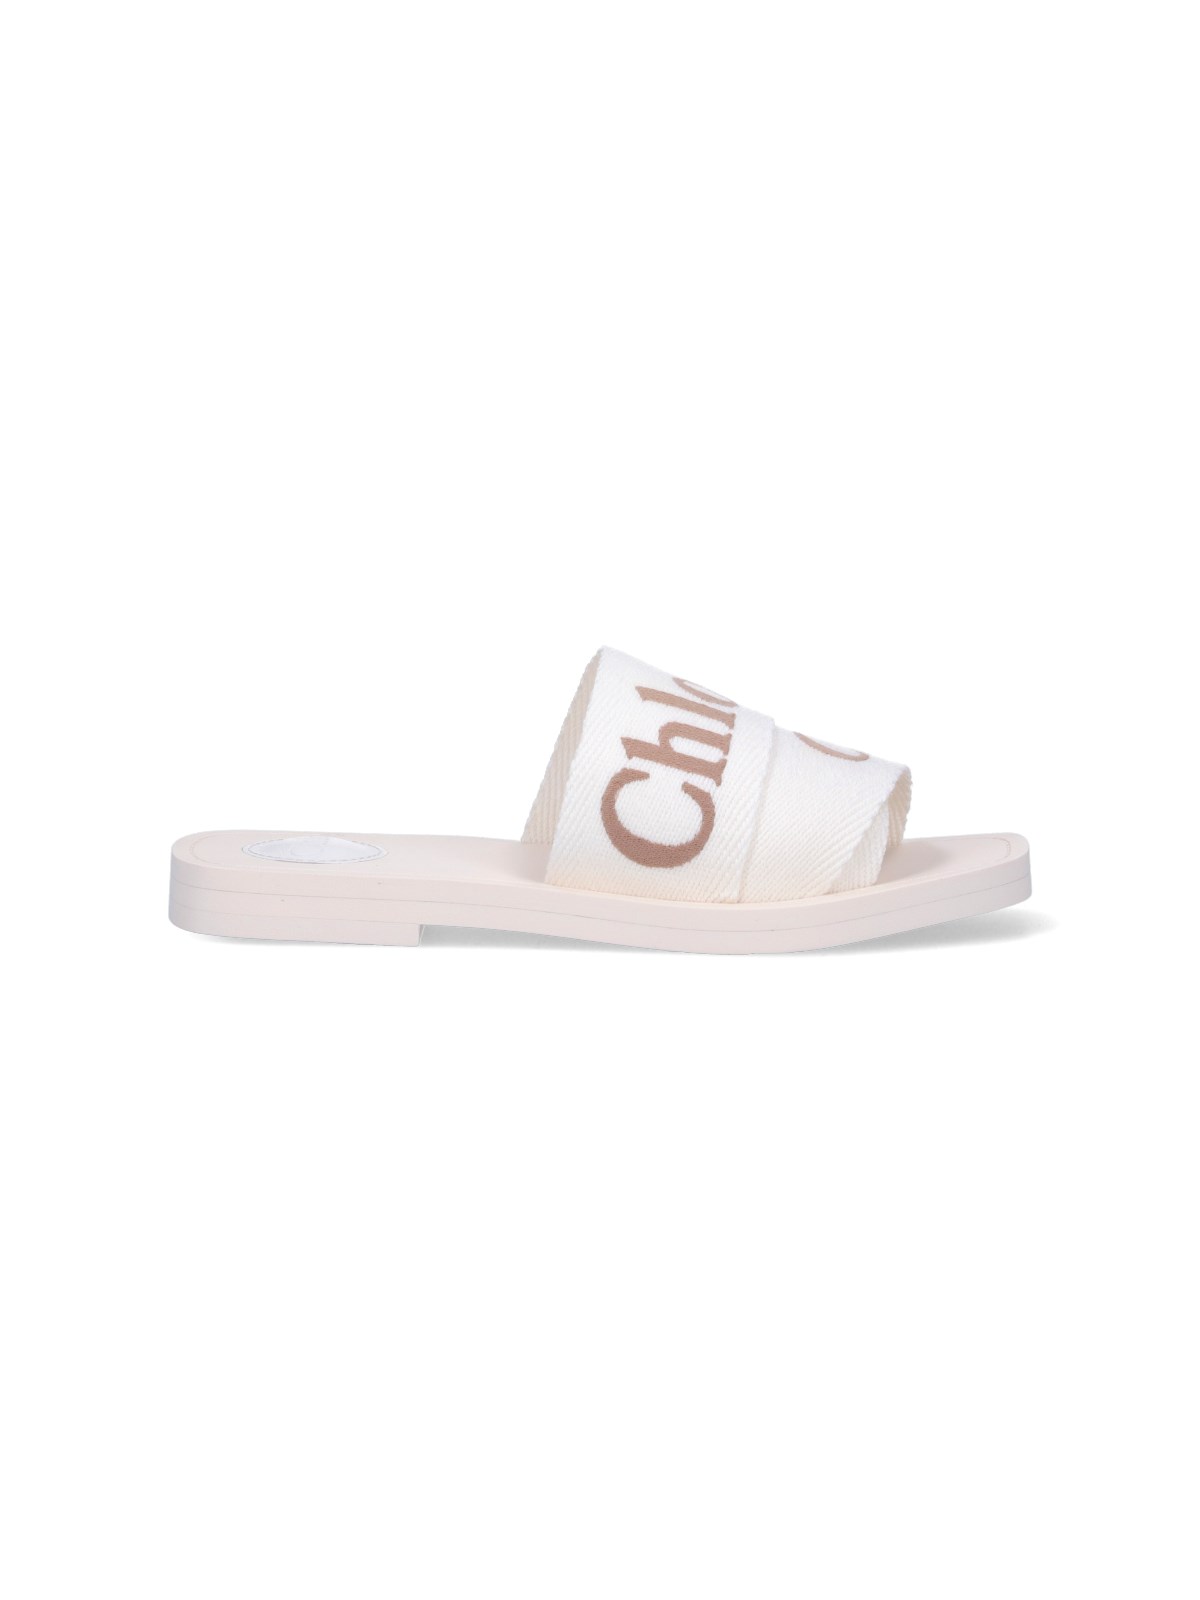 Shop Chloé Slide Sandals "woody" In White